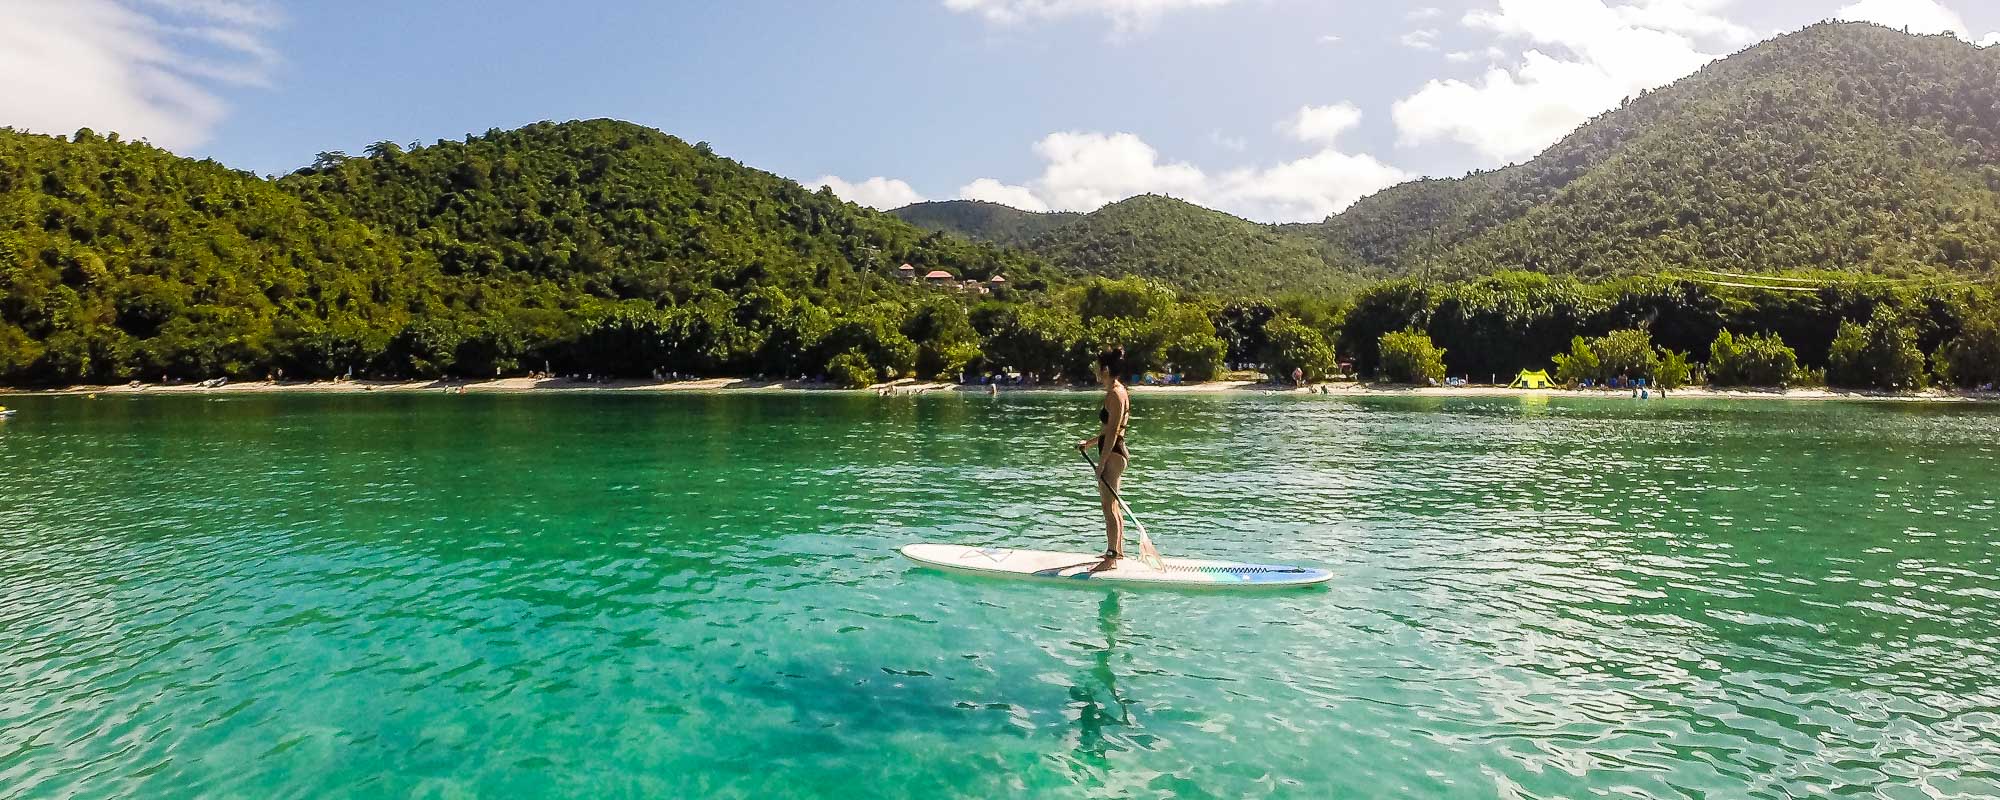 Stand-up Paddleboarding in Maho Bay, Virgin Islands National Park